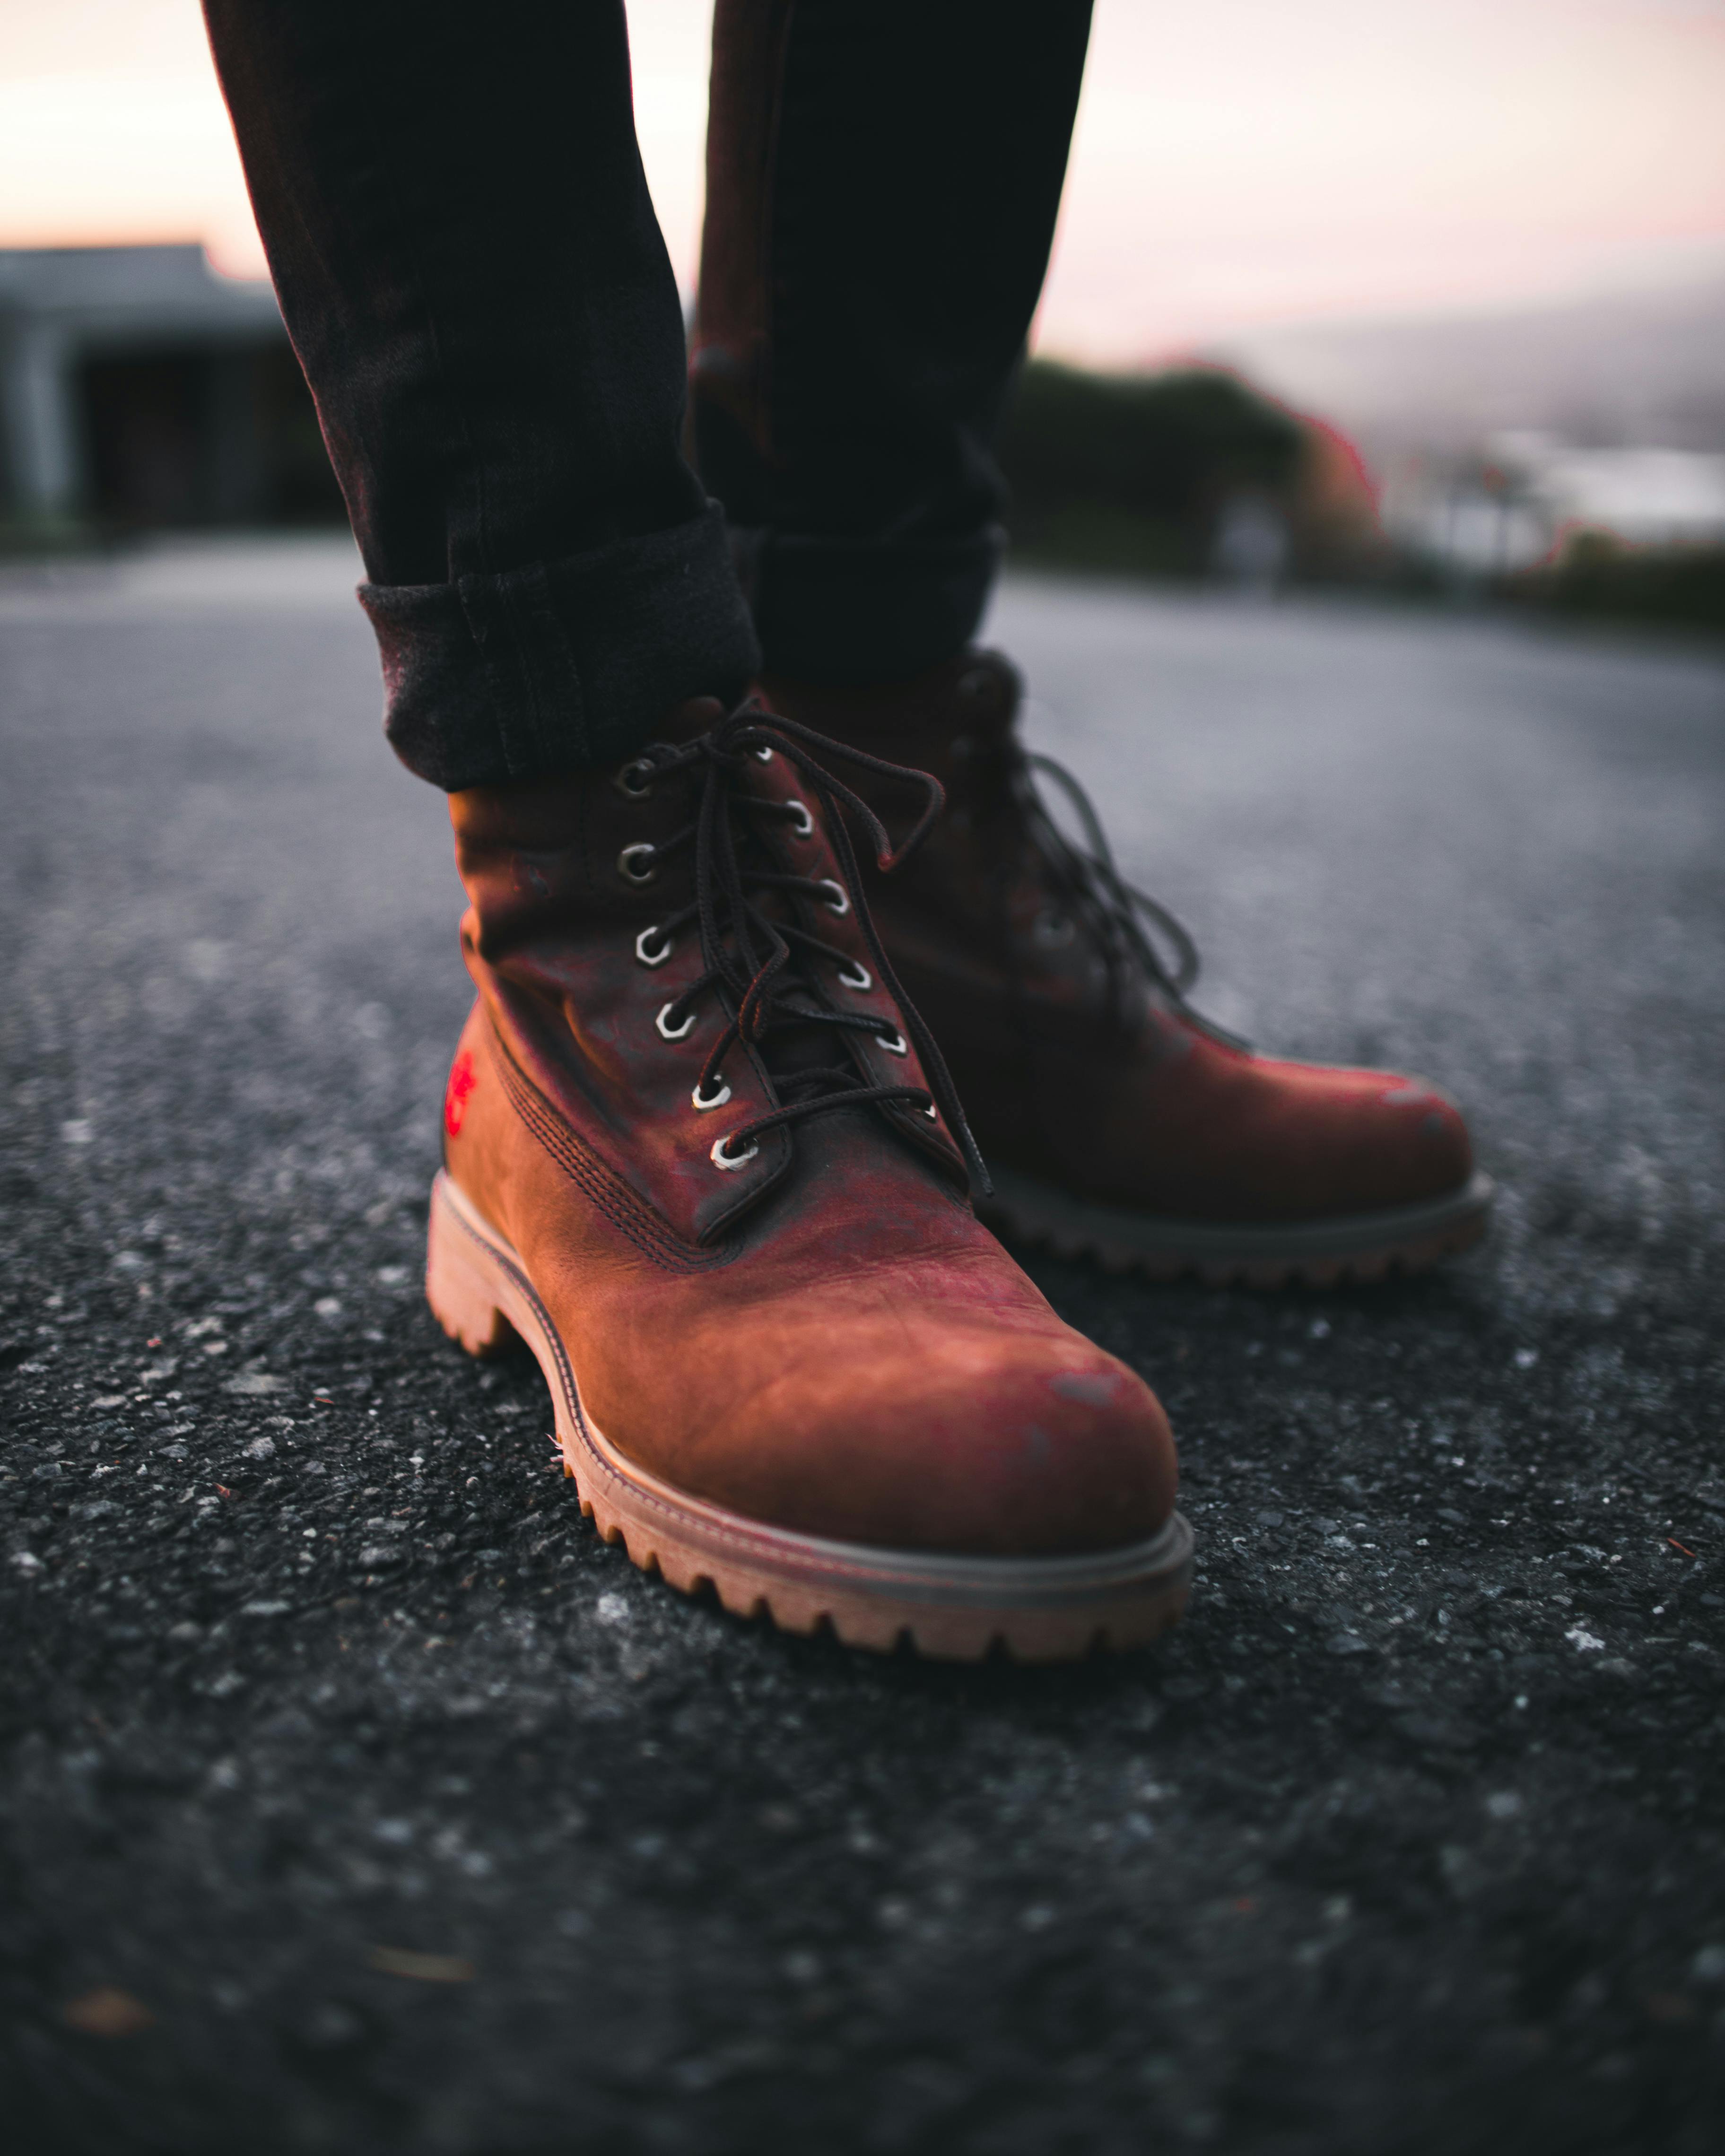 Person of Brown Timberland Work Boots and Black Denim Skinny Jeans on Asphalt Road · Free Stock Photo